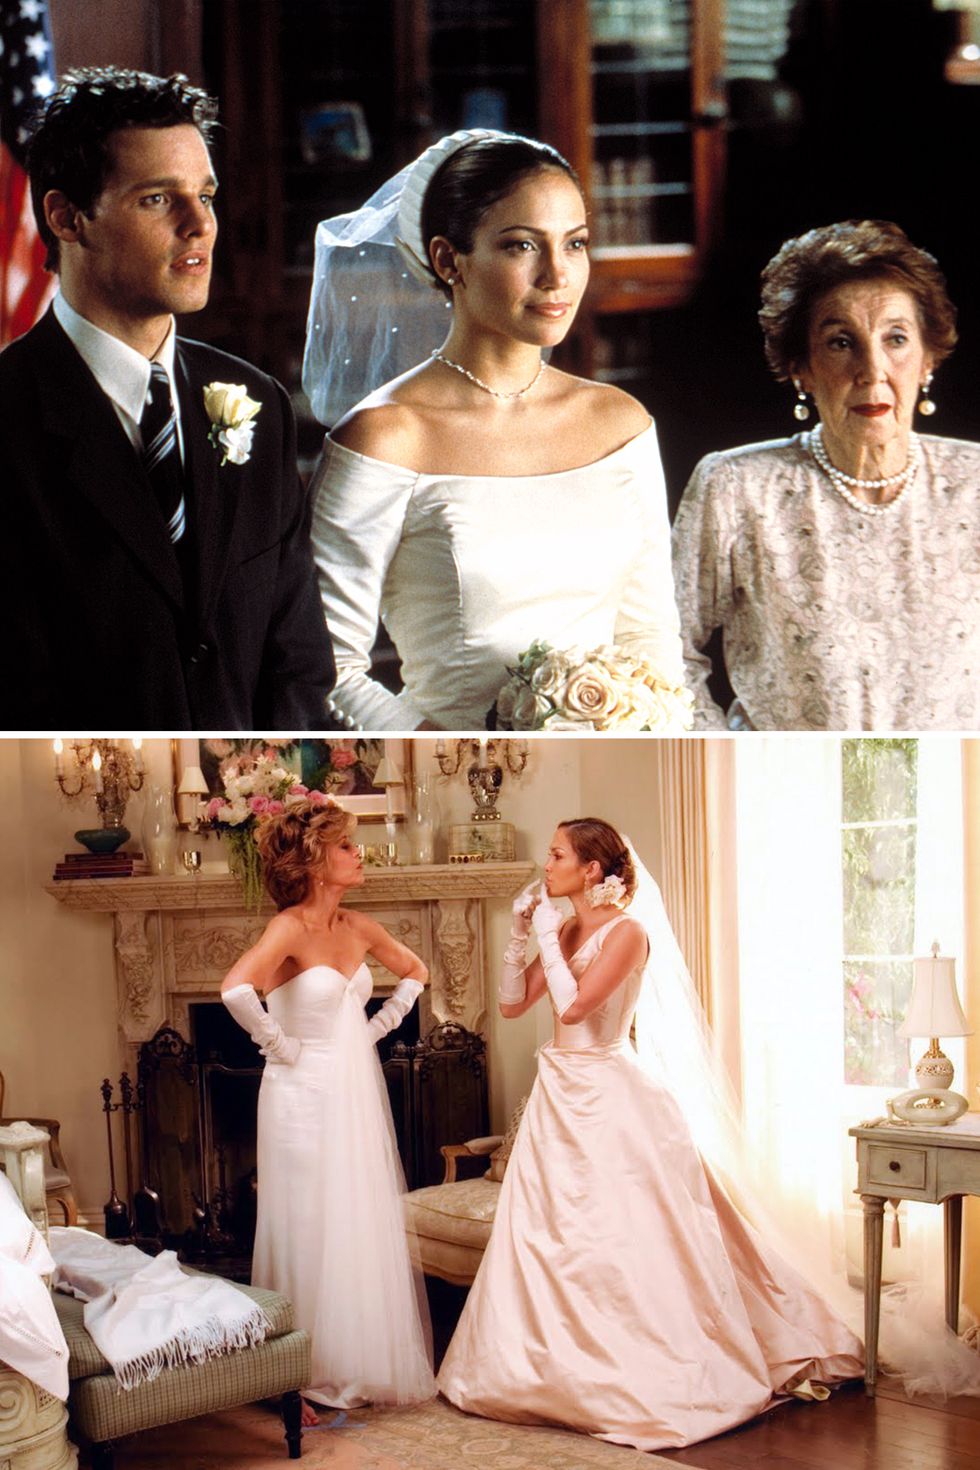 Bride Updated Mom's 1985 Wedding Dress With Sheer Bodice, Dramatic Train